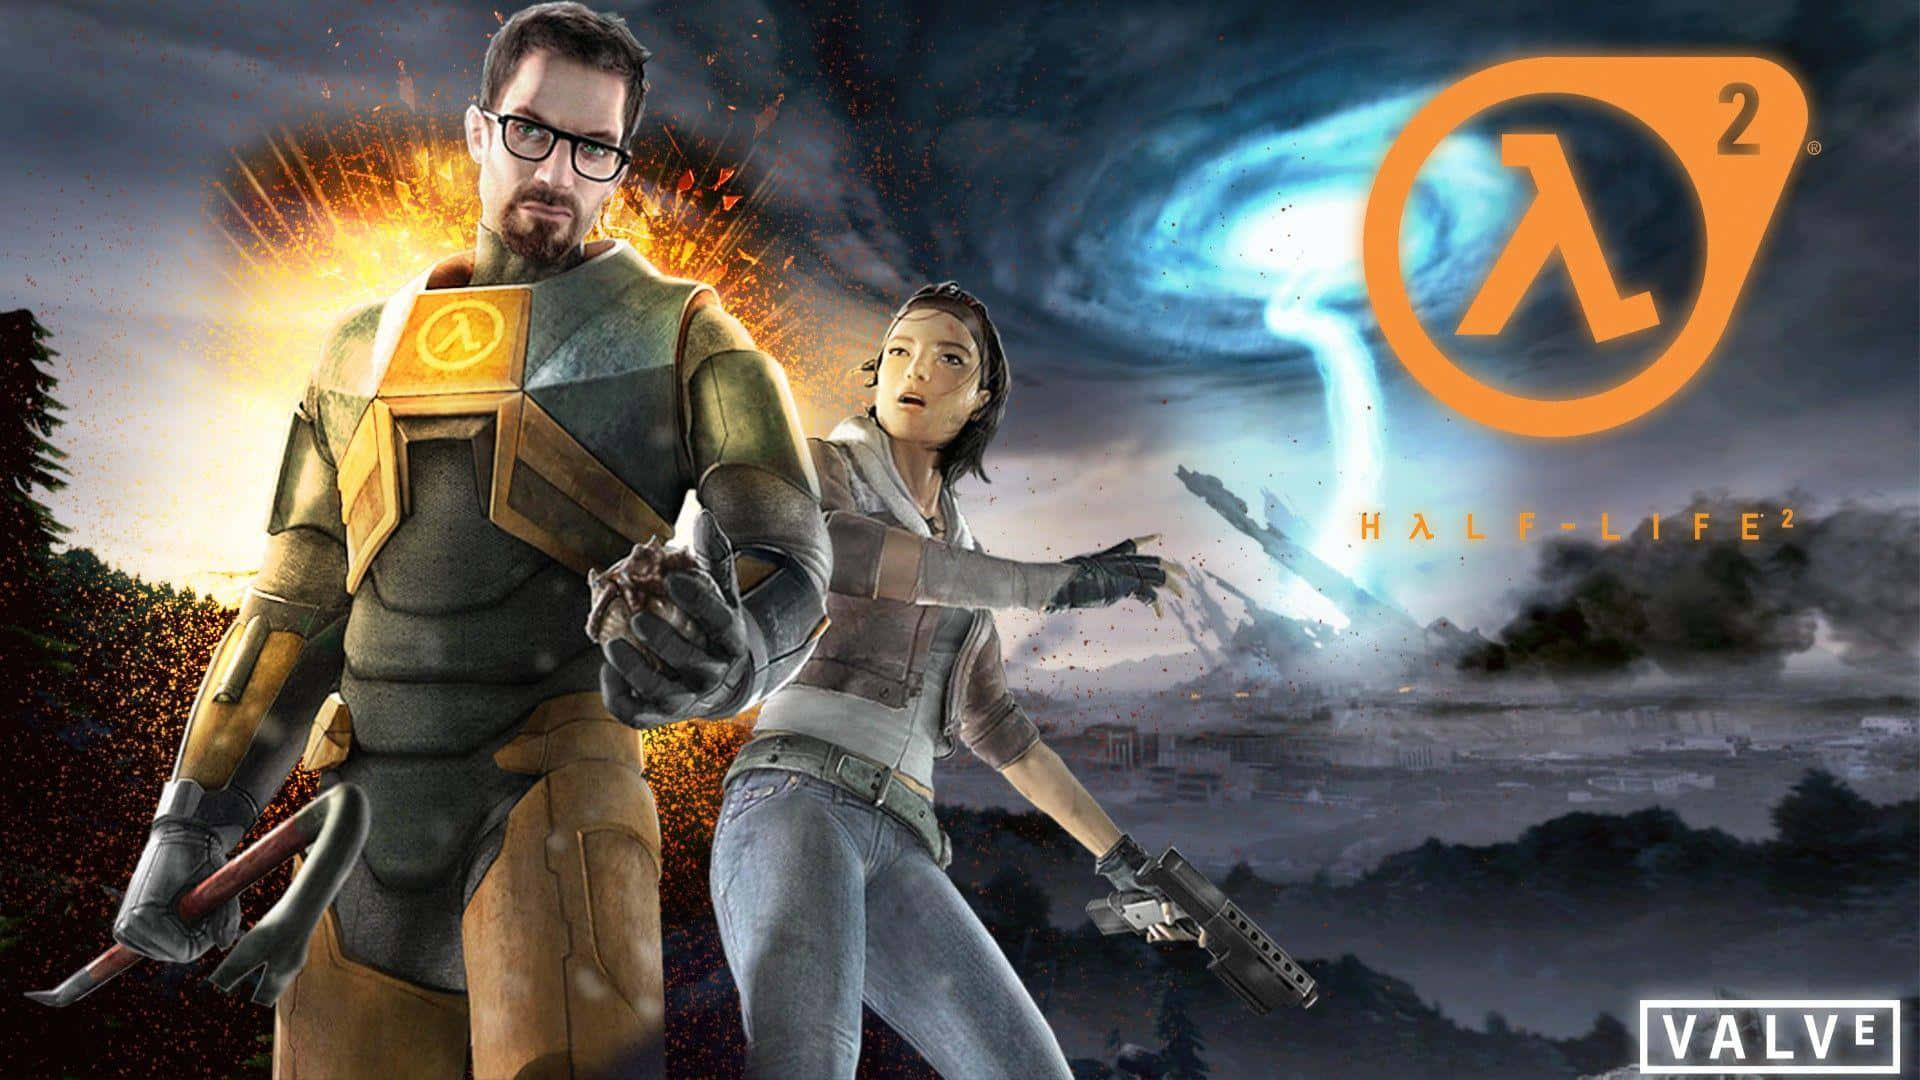 The heart-pounding action of Half Life 2 Wallpaper